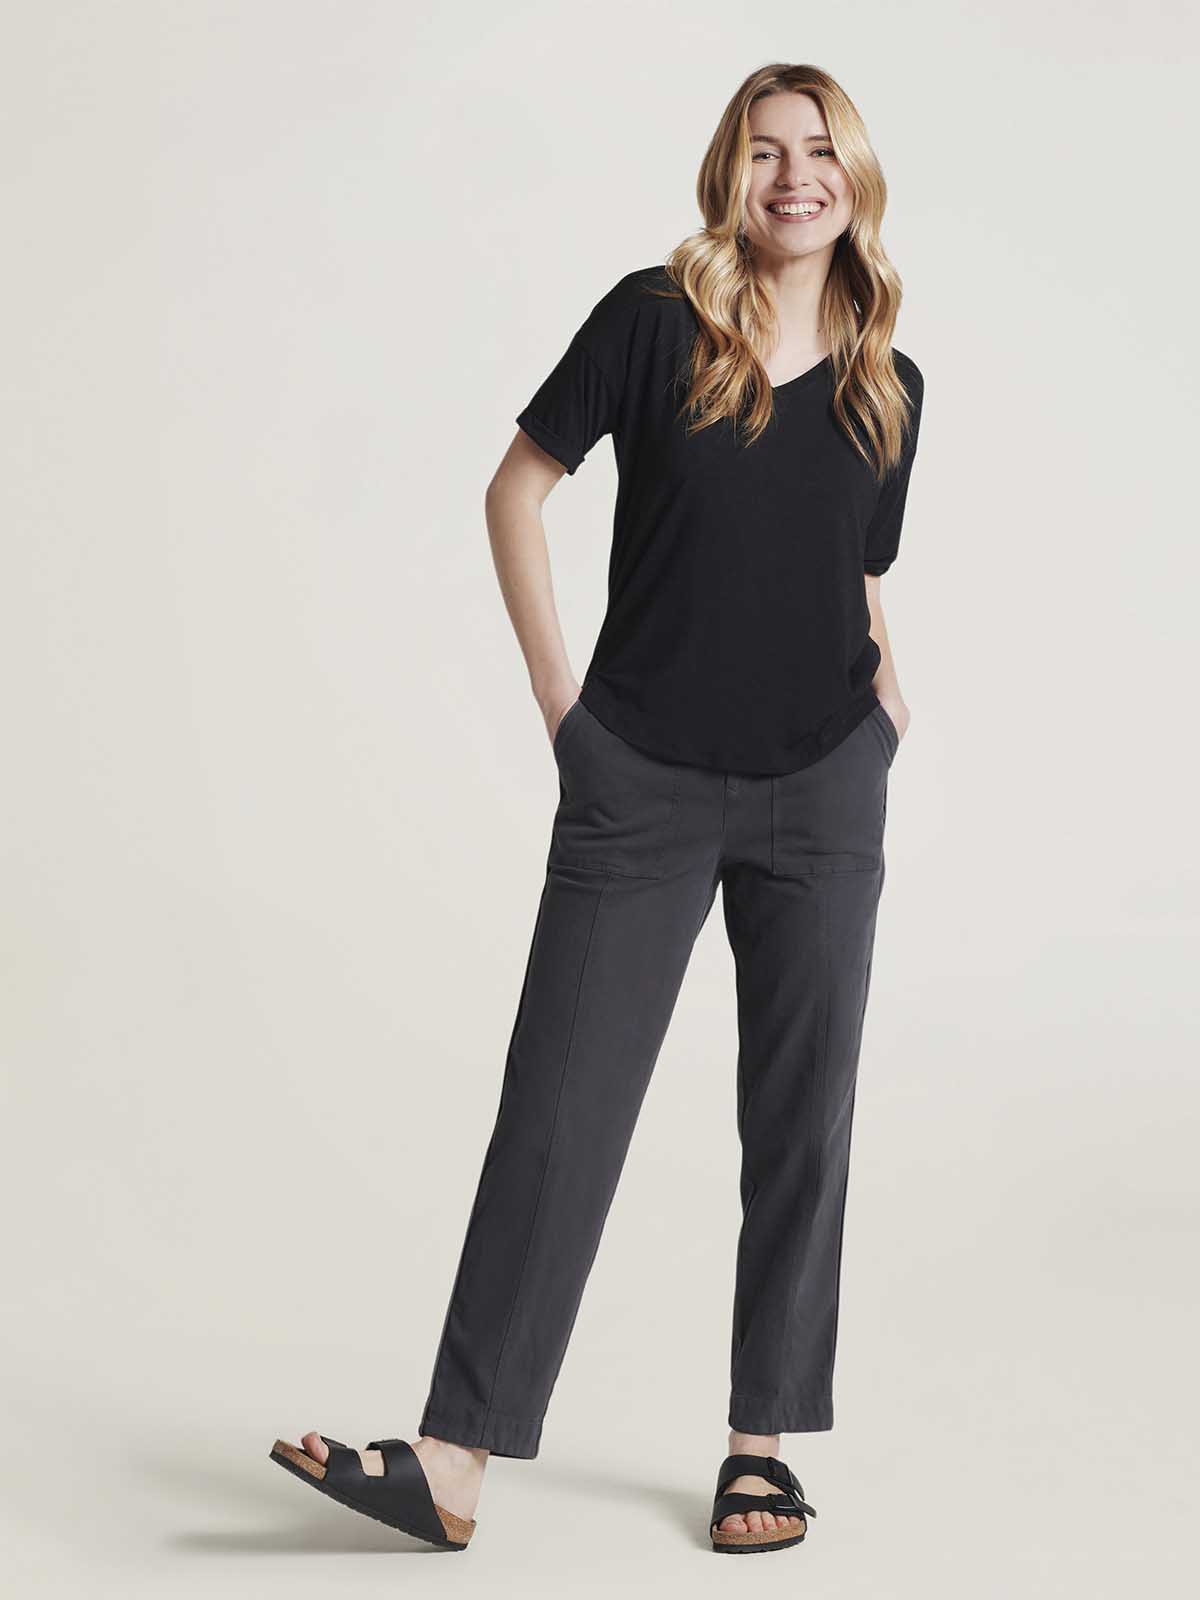 Women's trousers Superdry Carpenter - Trousers - Women's Lifestyle -  Lifestyle